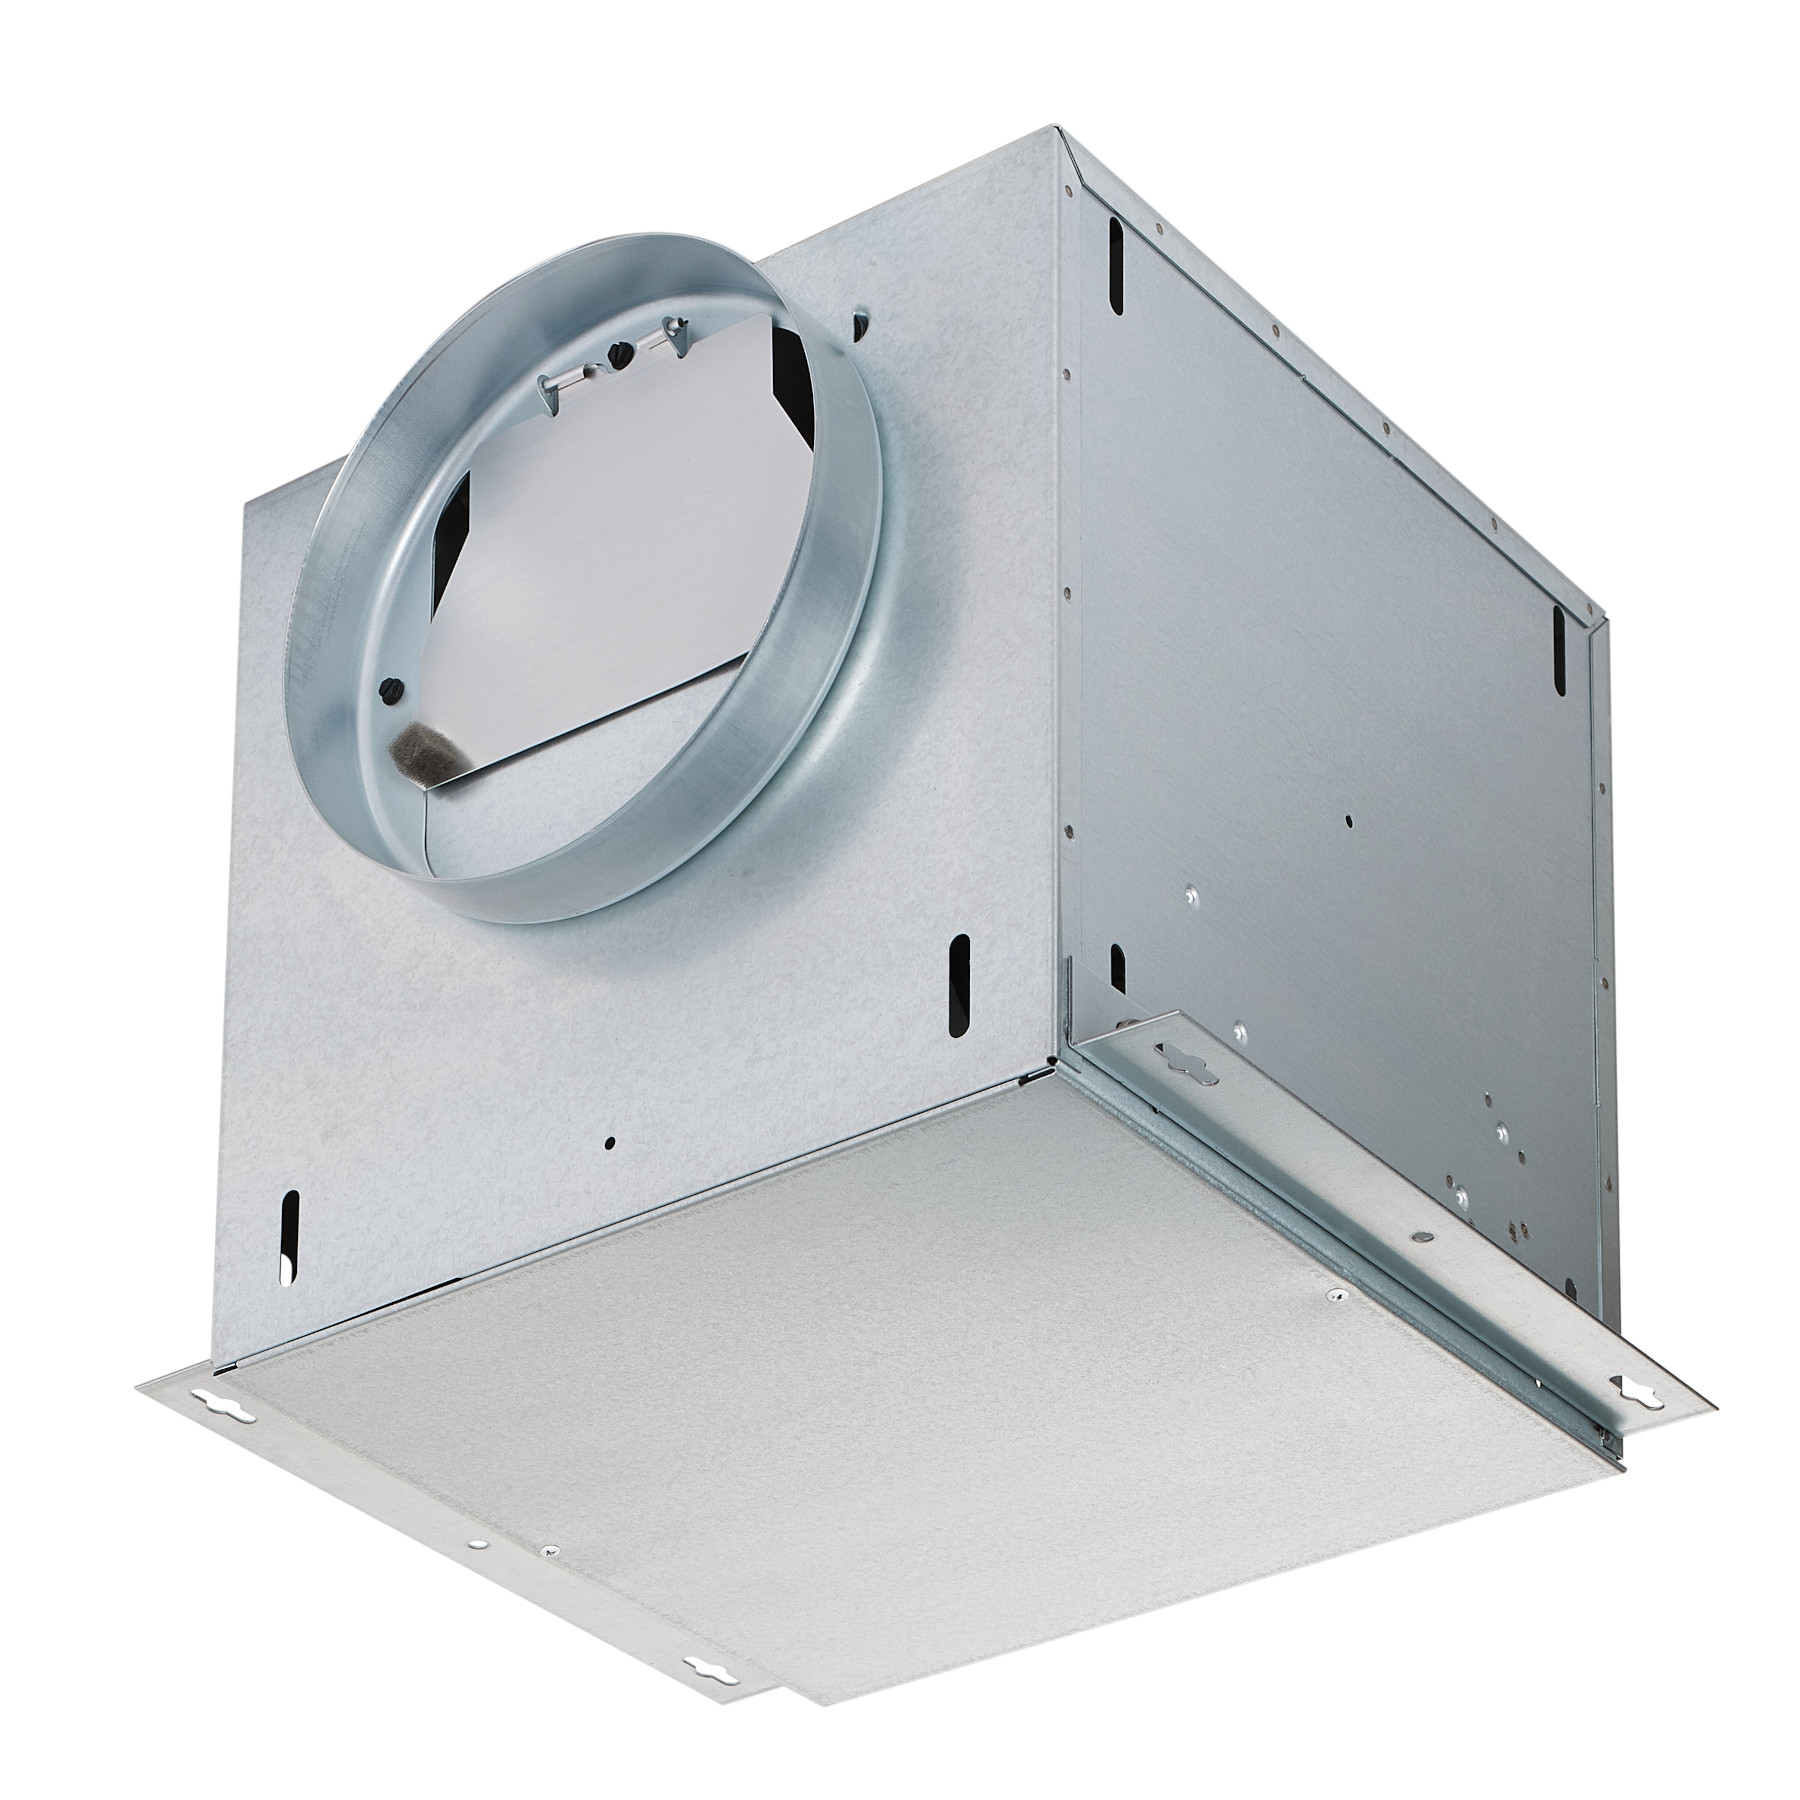 High-Capacity, Light Commercial 233 CFM InLine Ventilation Fan, ENERGY STAR® certified